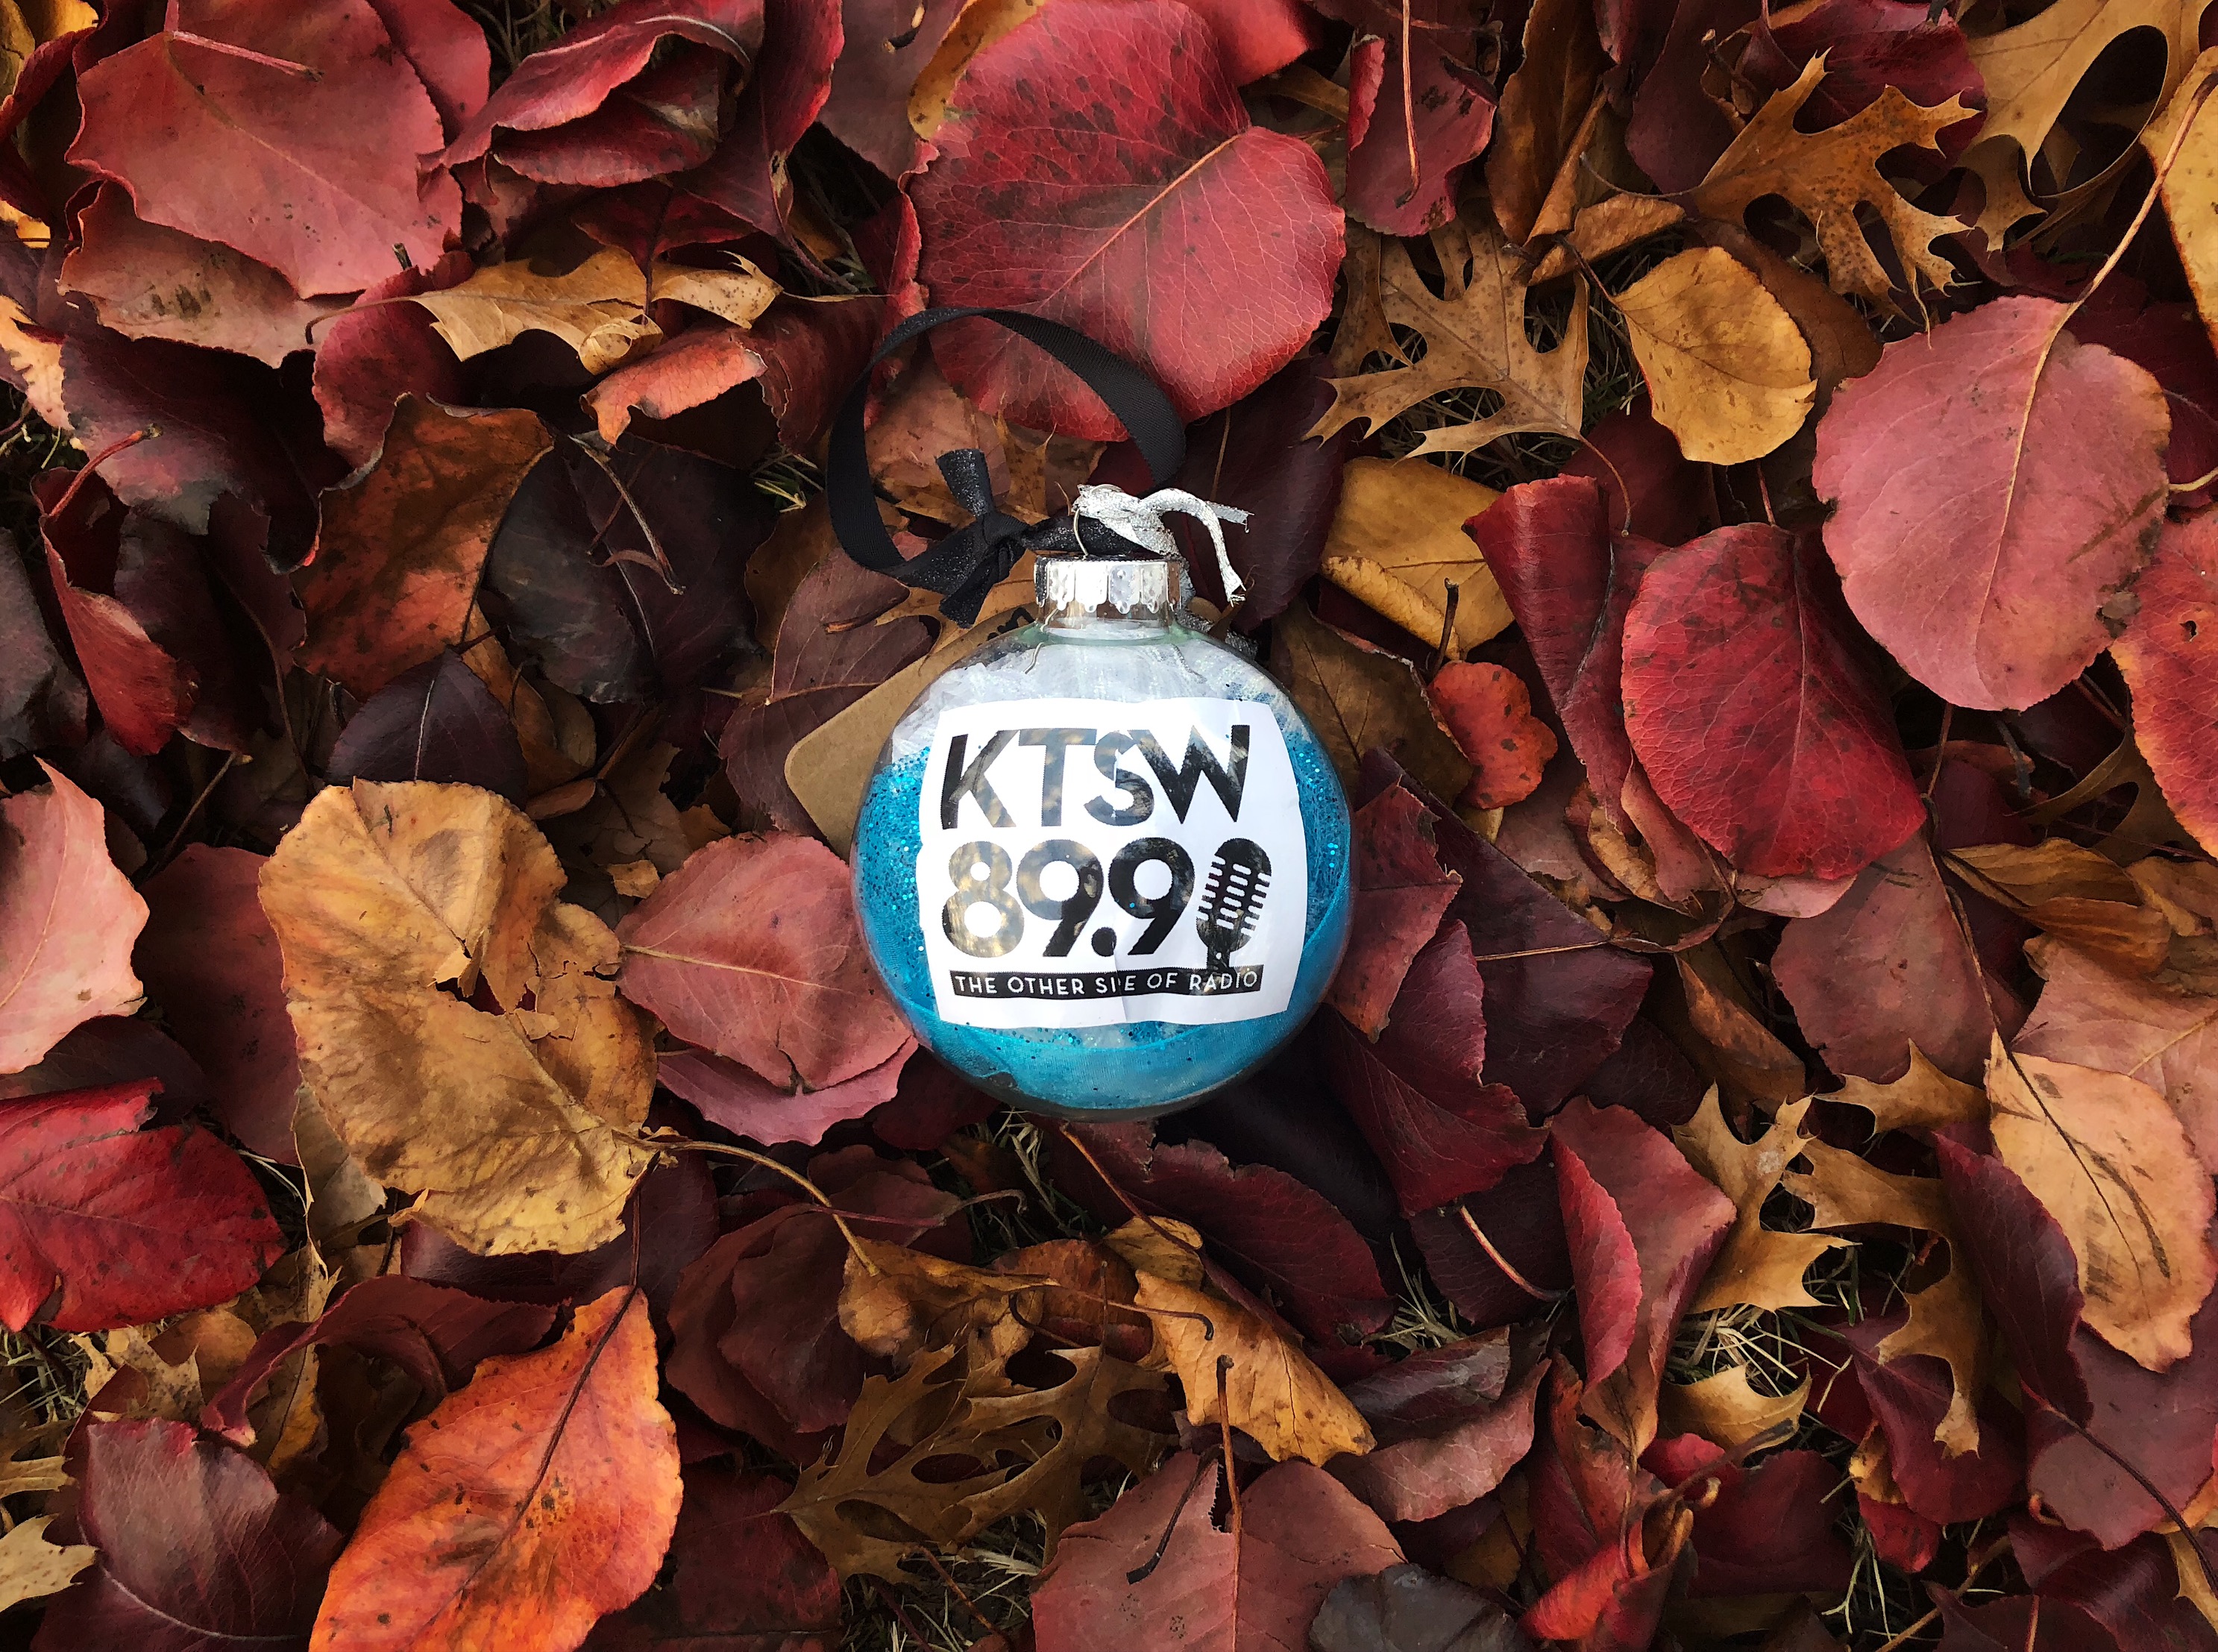 The photo features a clear ornament with sea blue tissue paper on the inside as well as a paper with the KTSW logo printed on it (KTSW 89.9: The Other Side of Radio). The ornament was photographed on a pile of fallen red, brown and yellow leaves.